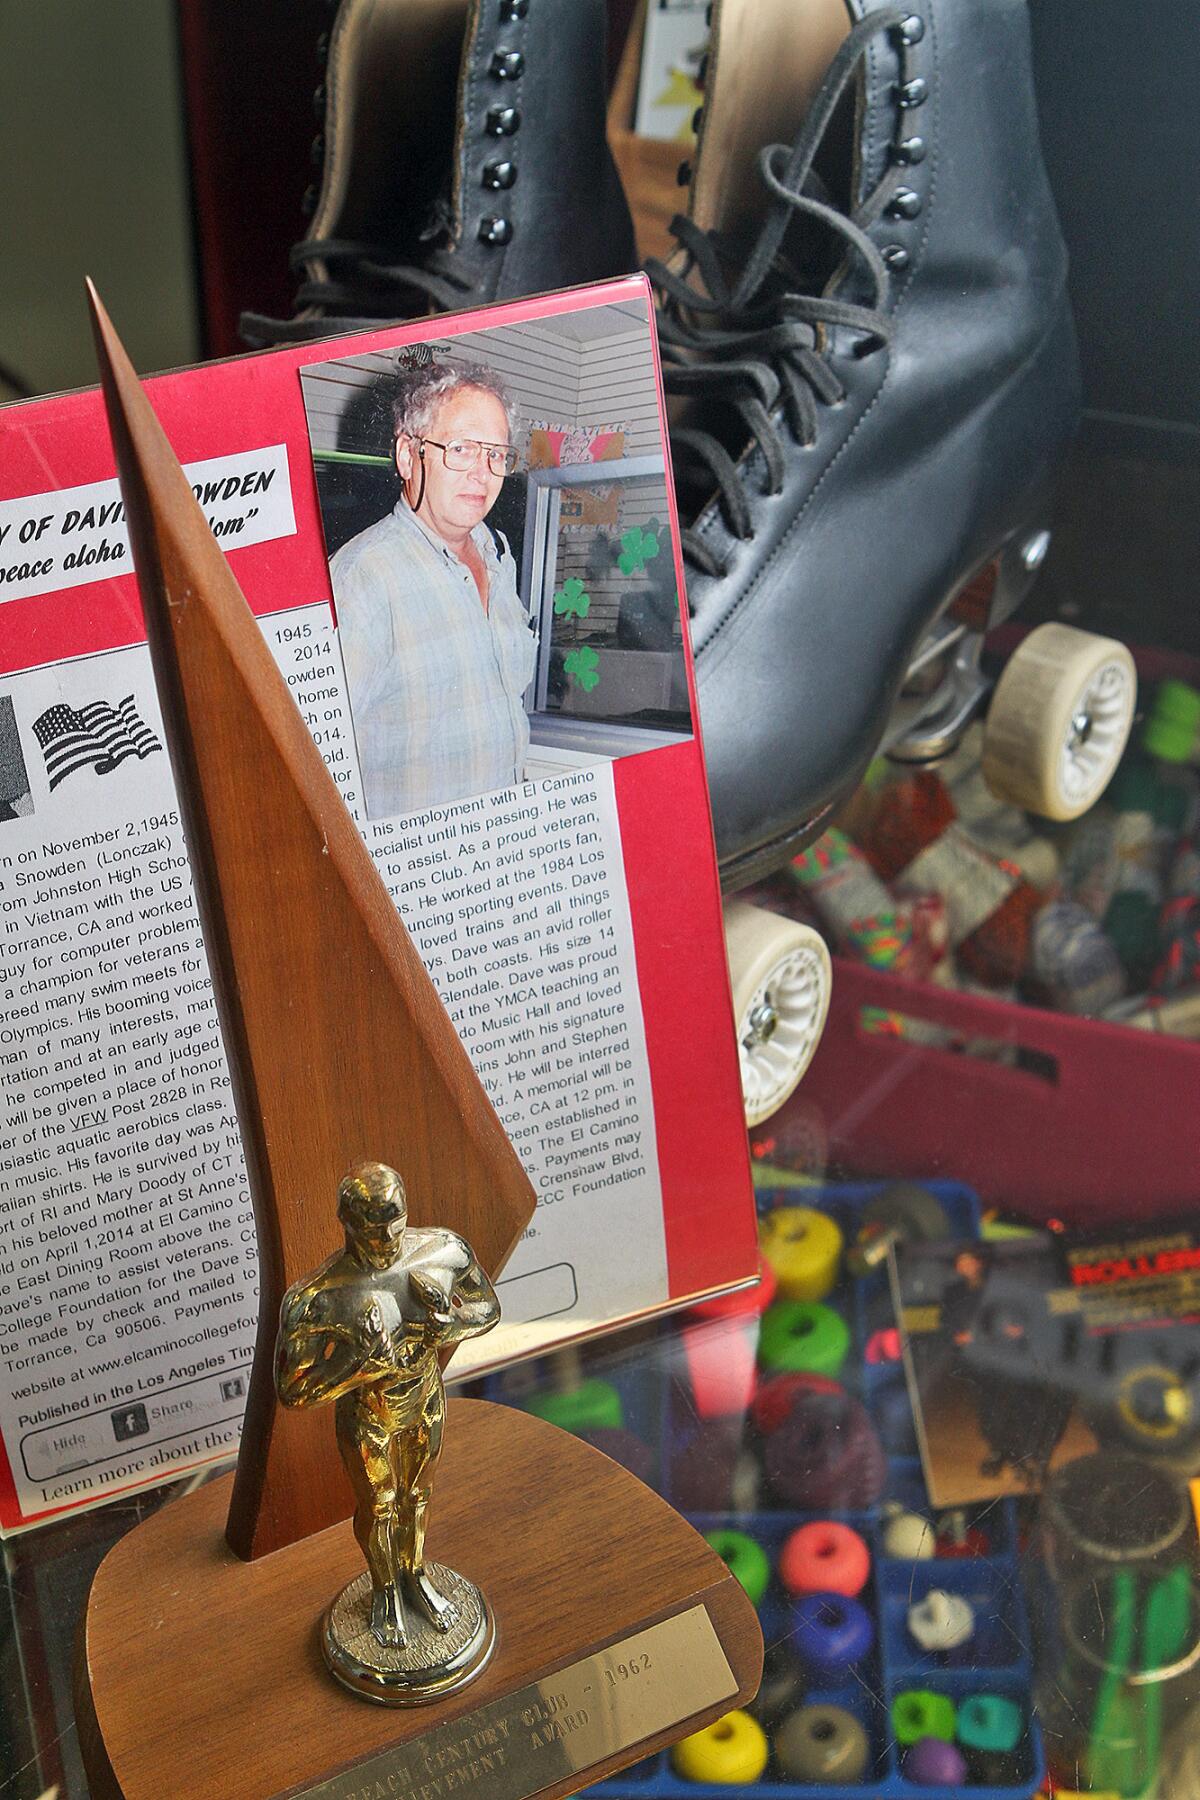 A memorial to David Snowden at Moonlight Roller Way in Glendale on Thursday, March 27, 2014. Snowden died recently, but when alive, he was a regular skater, contest judge, and competitive skater.